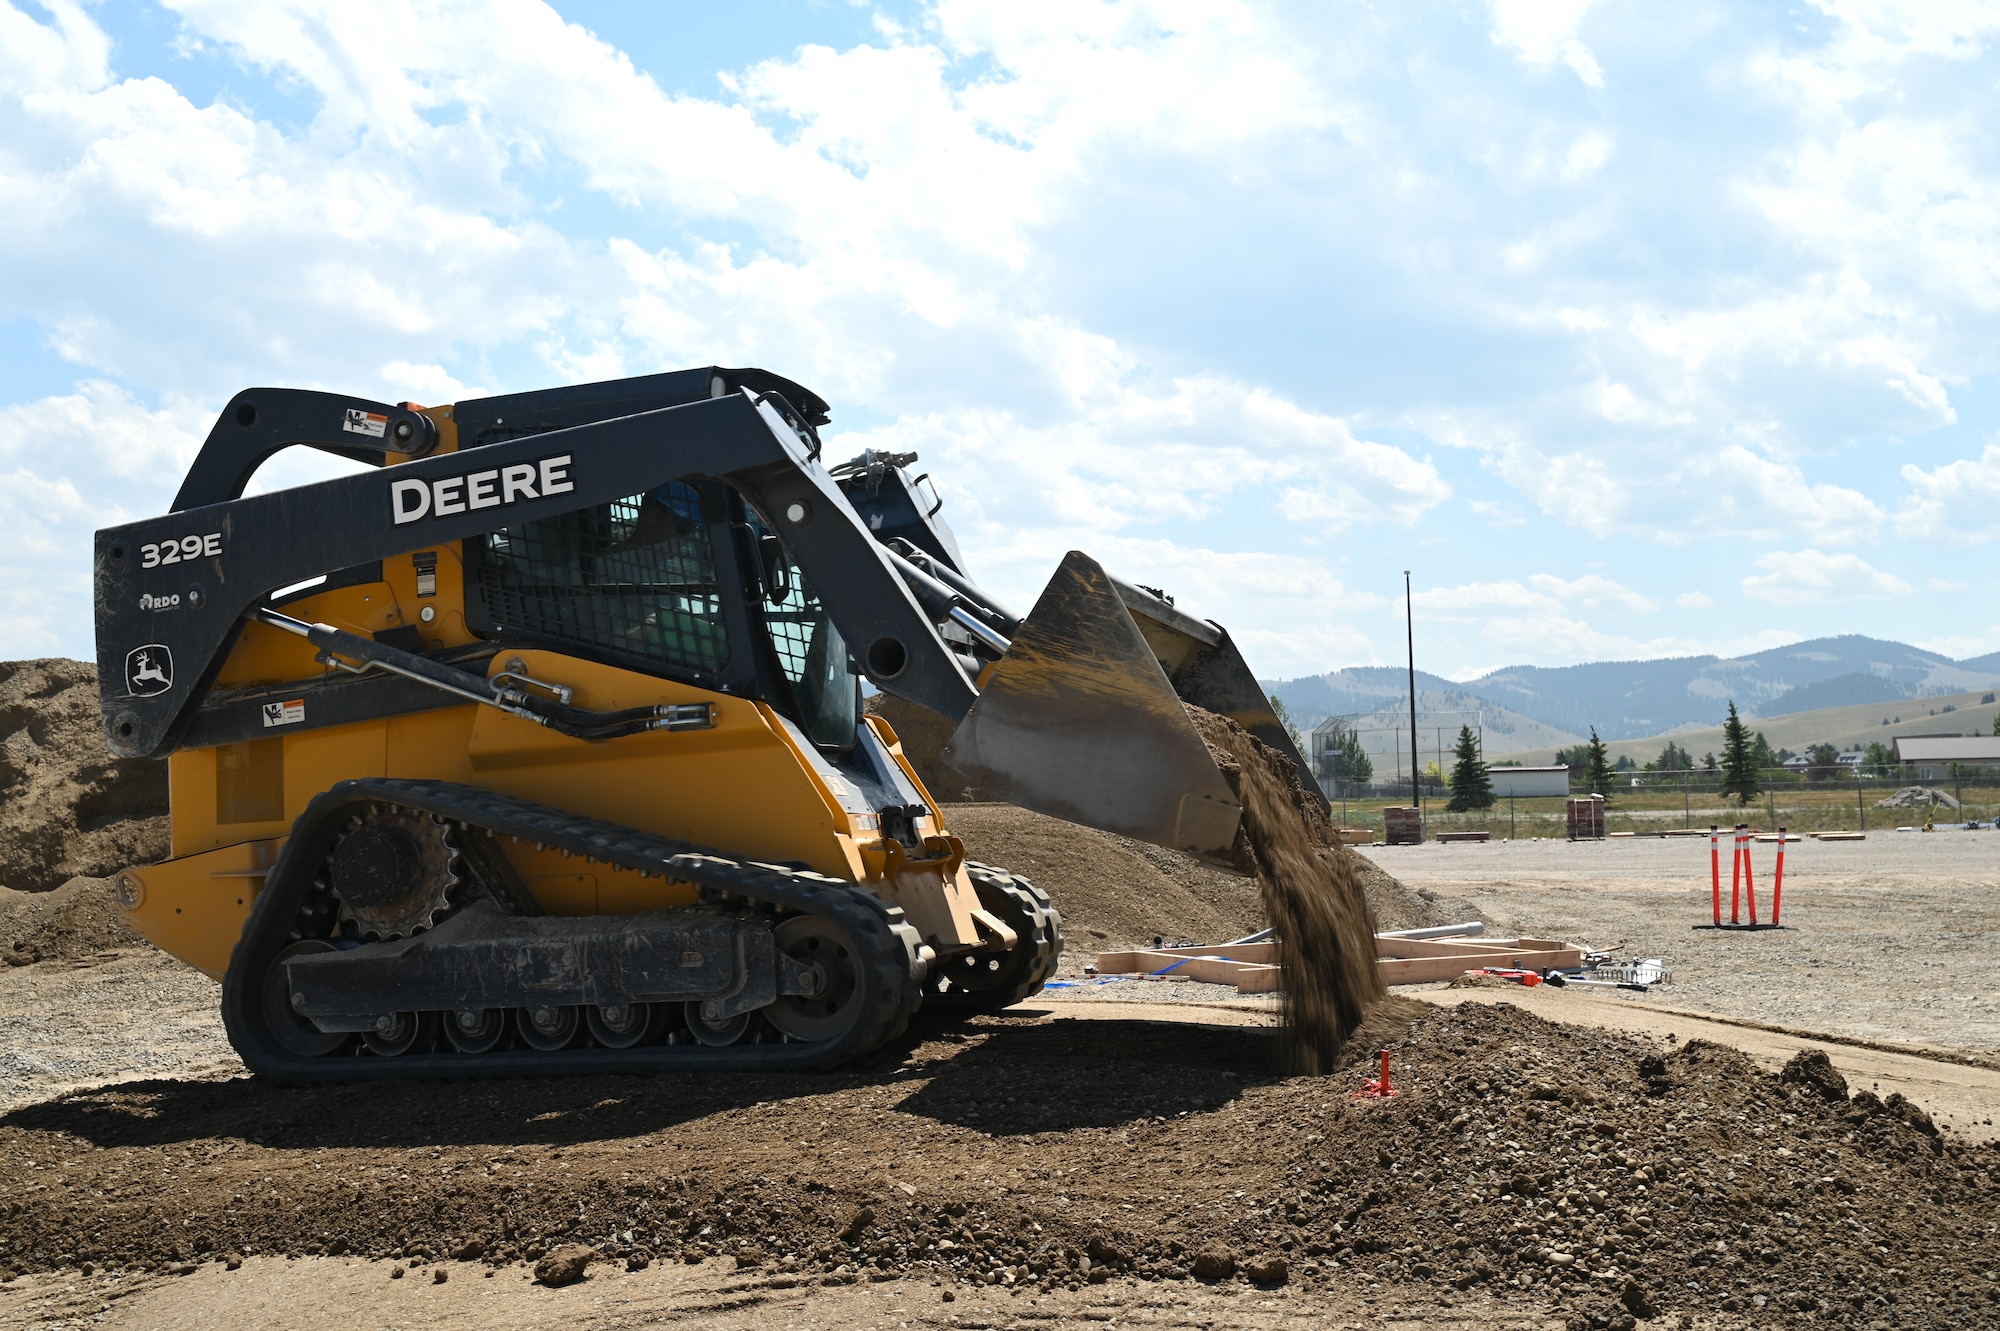 Staff Sgt. Eric Wise, 131st Civil Engineer Squadron, operates a compact track loader to prepare a building site at Fort William Henry Harrison, Montana, July 25, 2023. Civil Engineering Airmen gain valuable deployment and job skills on projects like this while saving taxpayer dollars in construction costs. (U.S. Air National Guard photo by Airman 1st Class Phoenix Lietch)